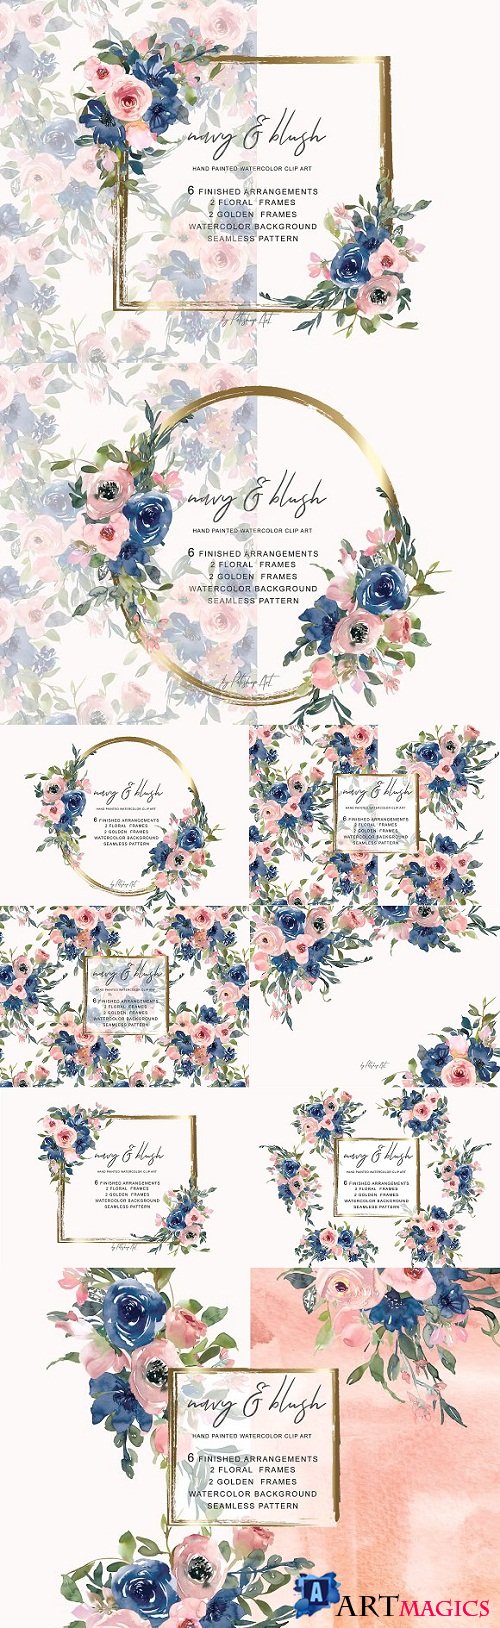 Watercolor Navy and Blush Floral Bou - 3520459